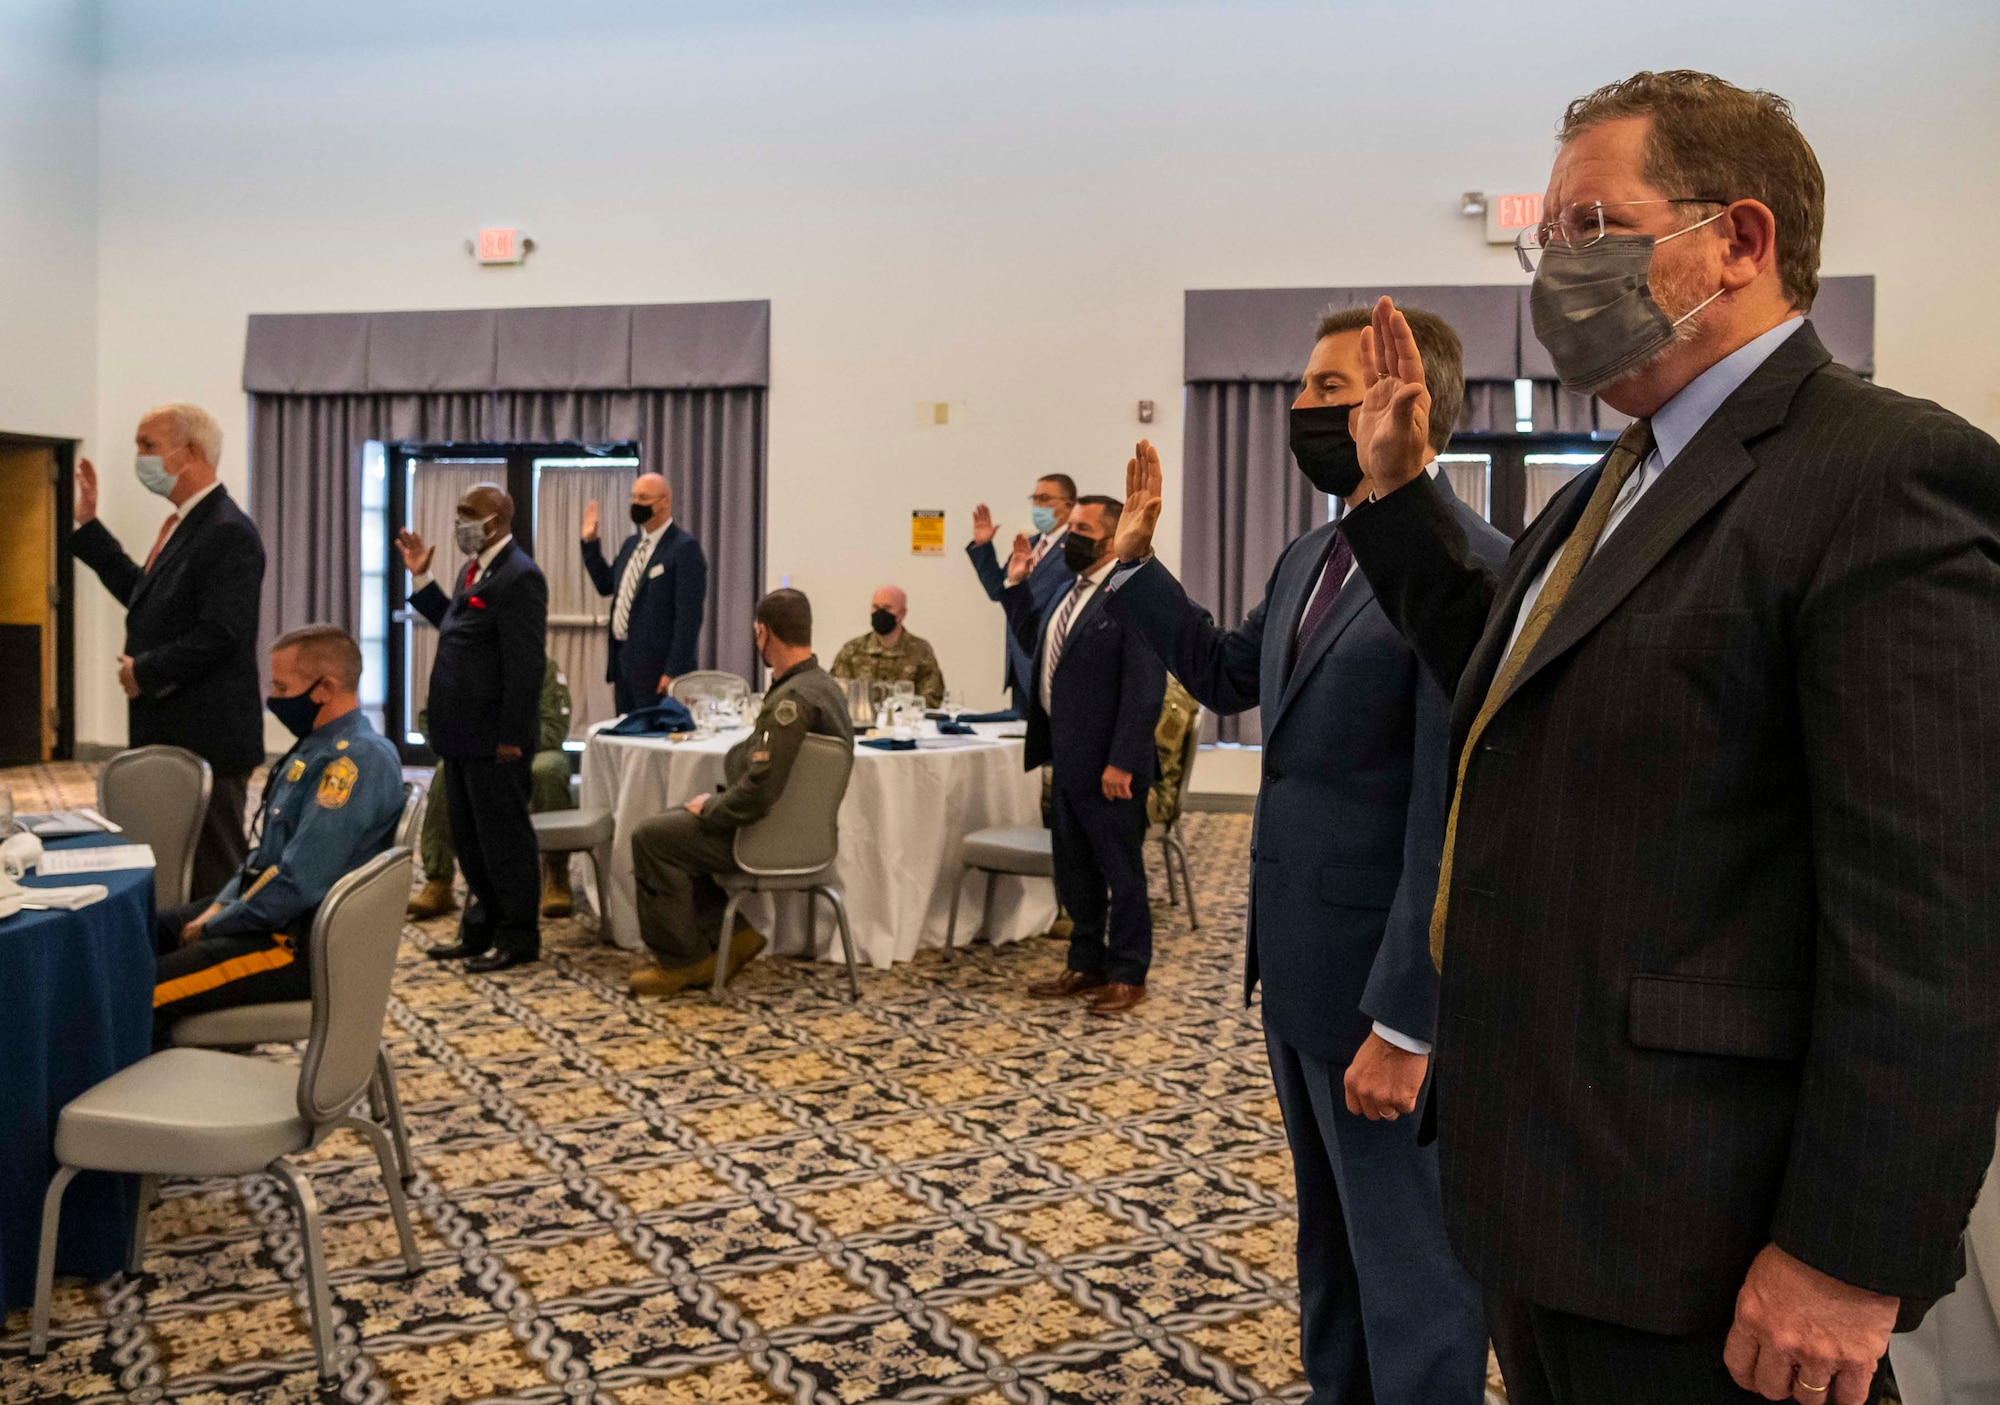 Newly appointed civic leaders recite the Honorary Commander’s Oath during the 2021 HCC Induction Ceremony Oct. 22, 2021, at Dover Air Force Base, Delaware. Thirty-eight local civic and business leaders were inducted into the HCC program. (U.S. Air Force photo by Senior Airman Stephani Barge)